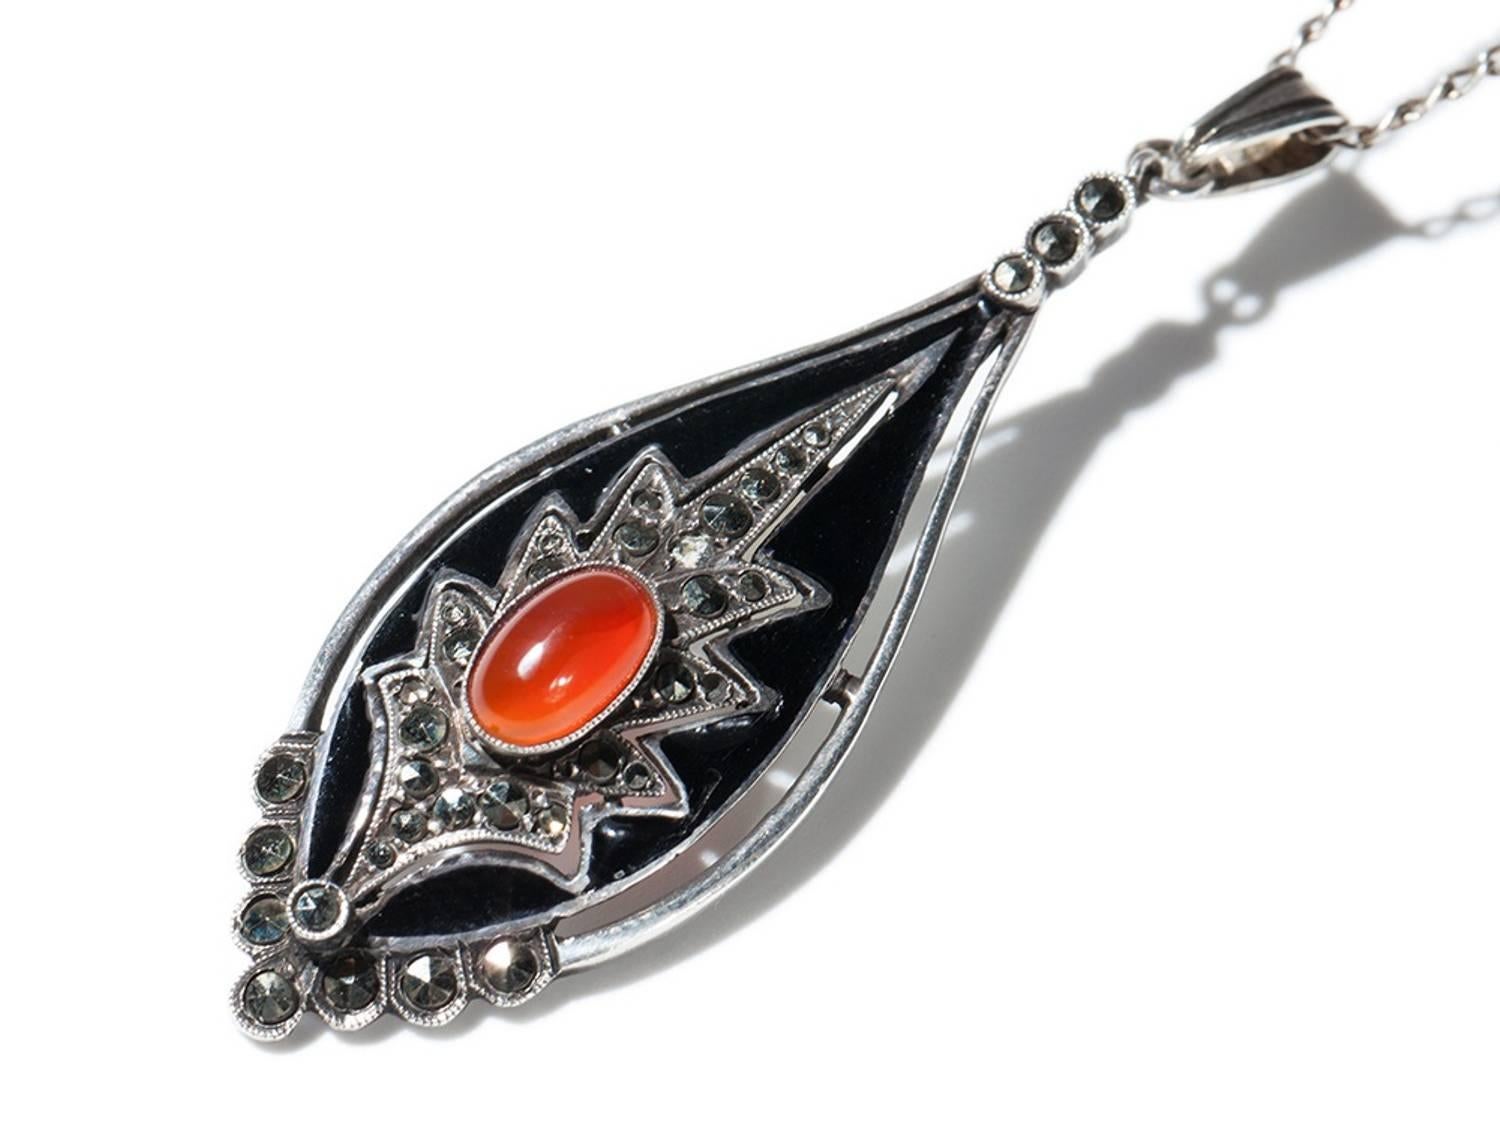 Teardrop-shaped black enamel pendant. Decorated with carnelian cabochon and marcasites. Silver. Marked on the back side: GERMANY STERLING TF. Total weight: 4.9 grams. A beautiful example of Theodor Fahrner’s jewellery art. 
Length: pendant 2.09 in (